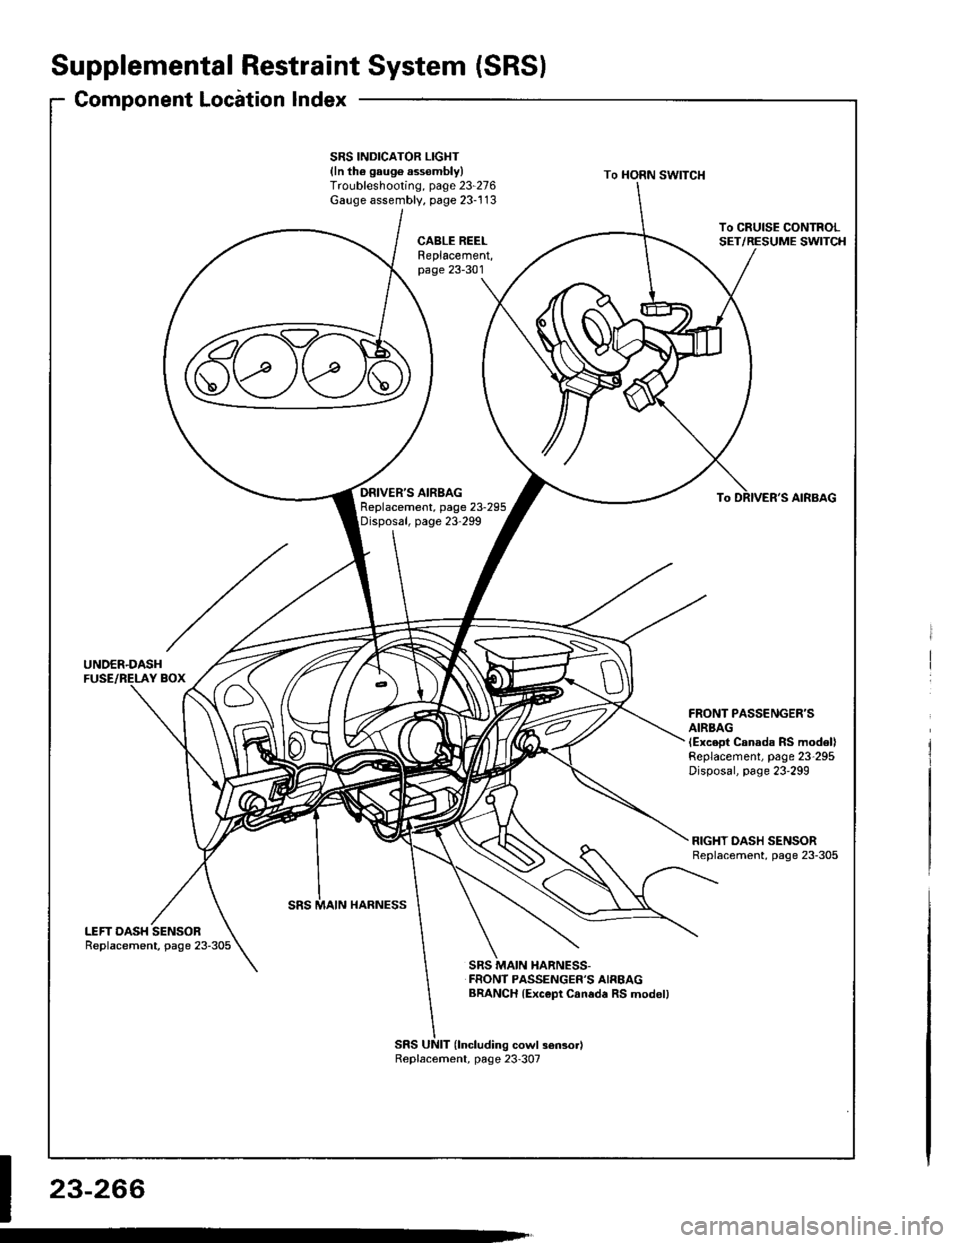 HONDA INTEGRA 1994 4.G Workshop Manual Supplemental Restraint System (SRS)
Component Locirtion Index
UNDER.DASHFUSE/RELAY BOX
SRS INDICATOR LIGHT(ln th6 gaug6 assembly)Troubleshooting, page 23-276Gauge assembly, page 23-113
CABLE REELRepla